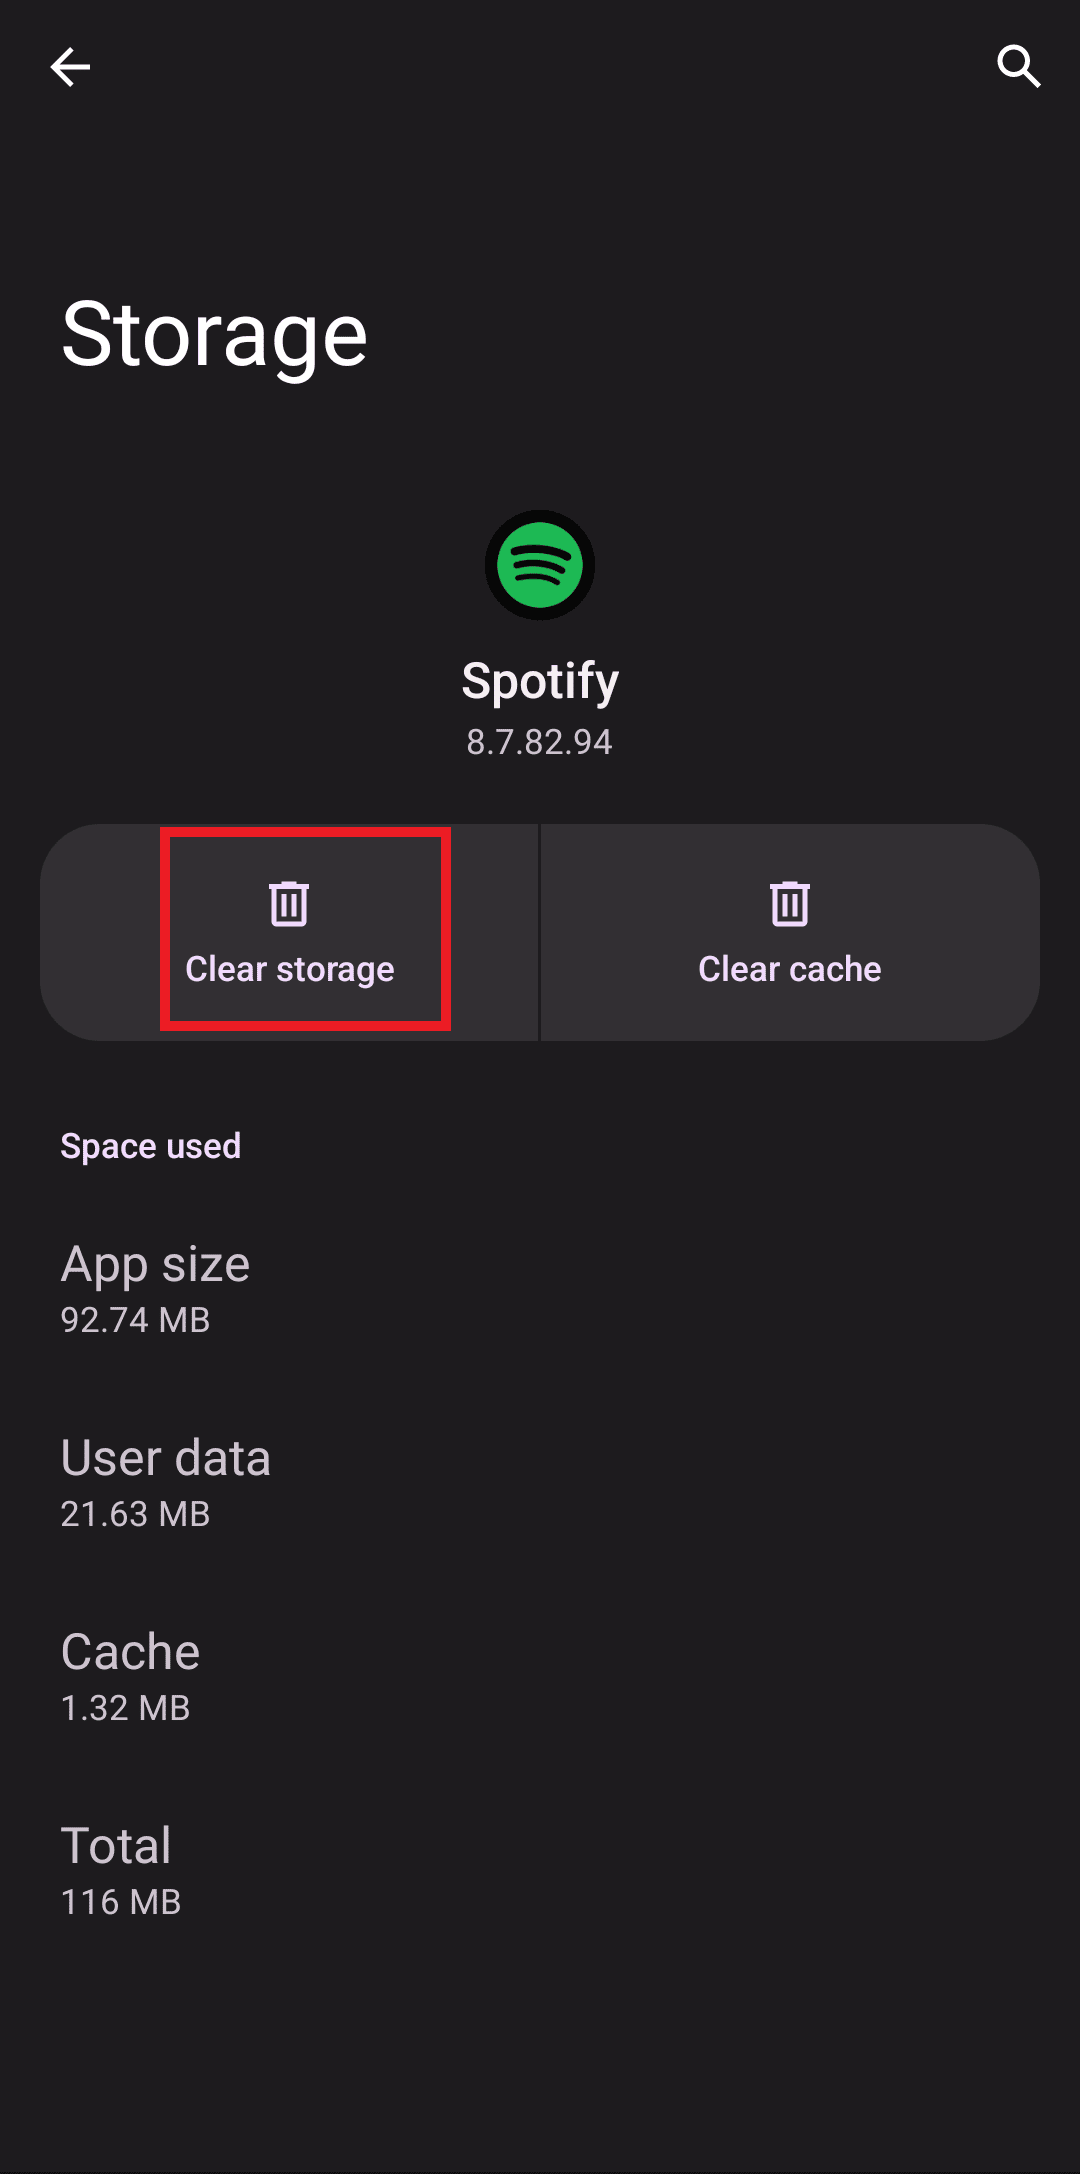 tap on clear storage